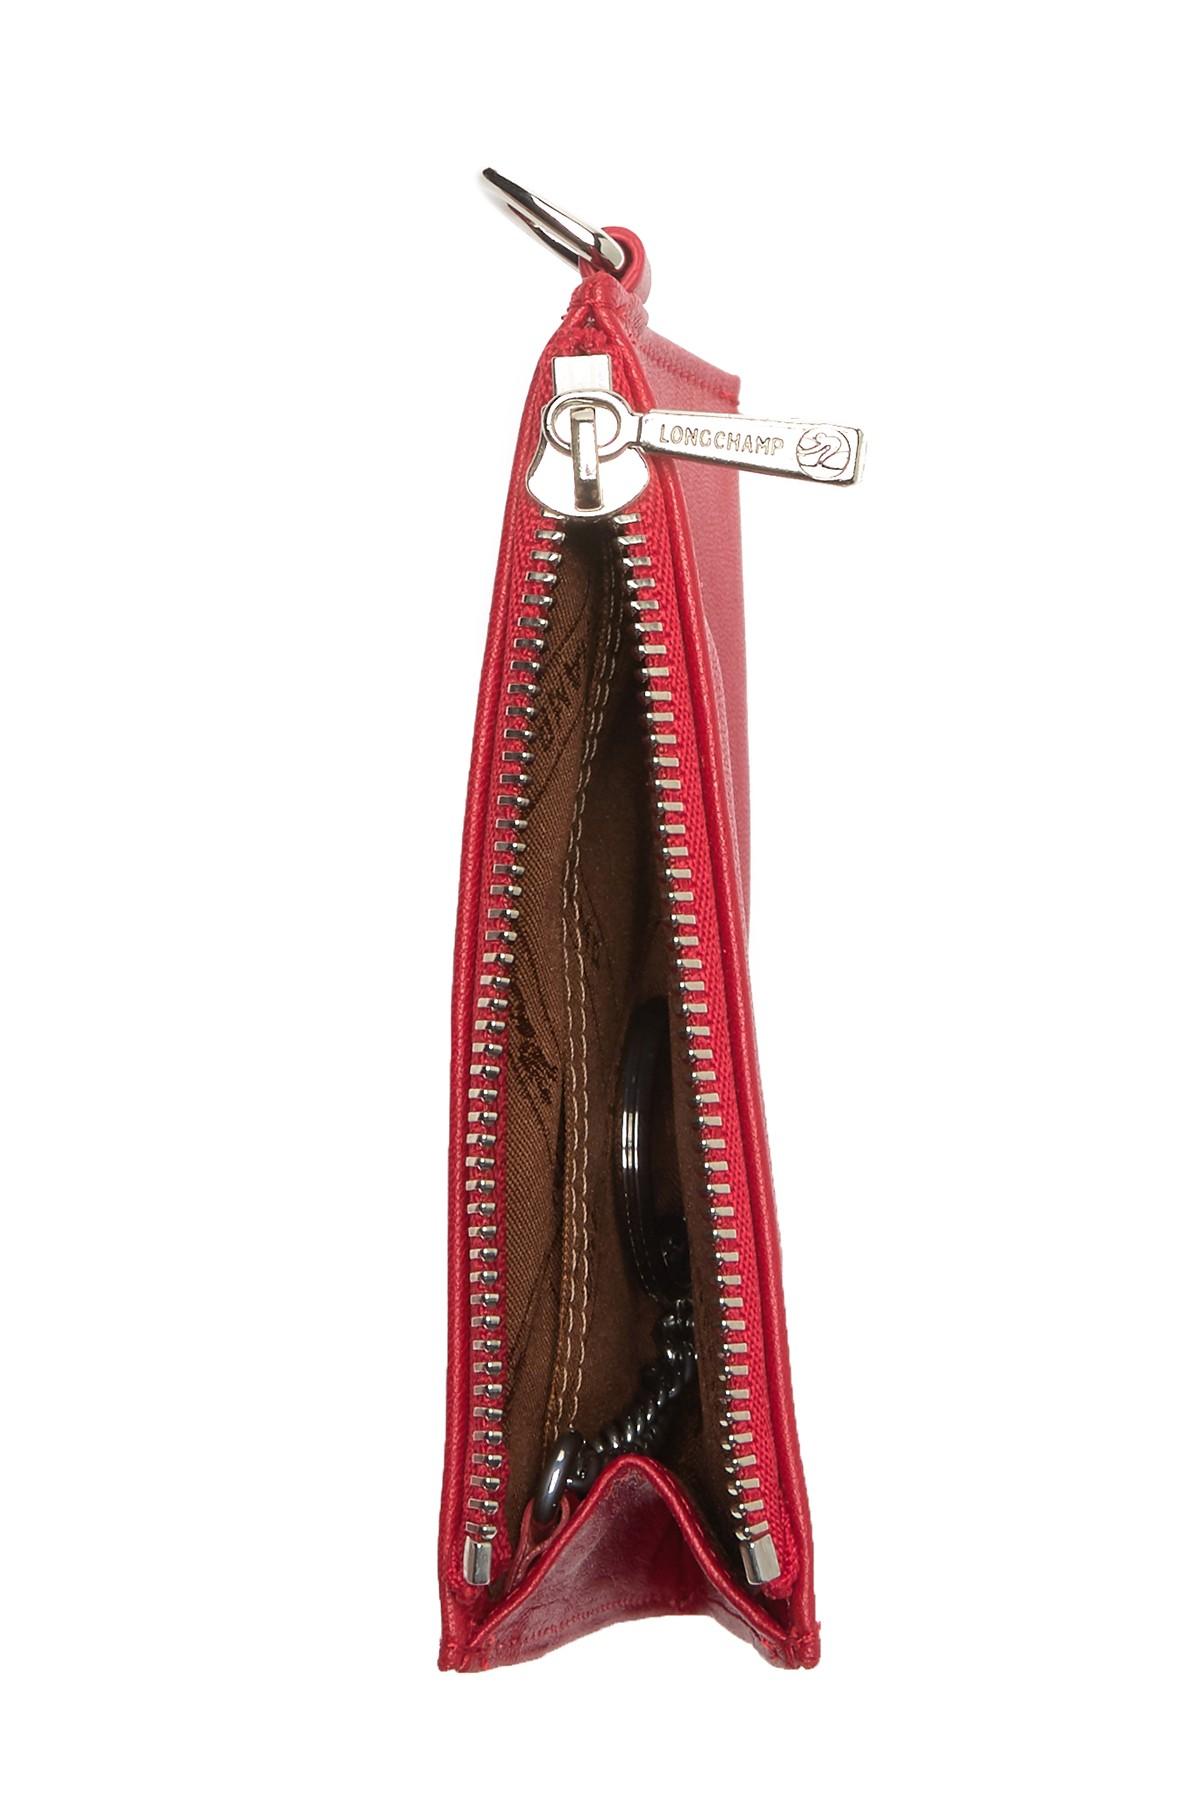 Longchamp Leather Coin Wallet With Key Ring in Red